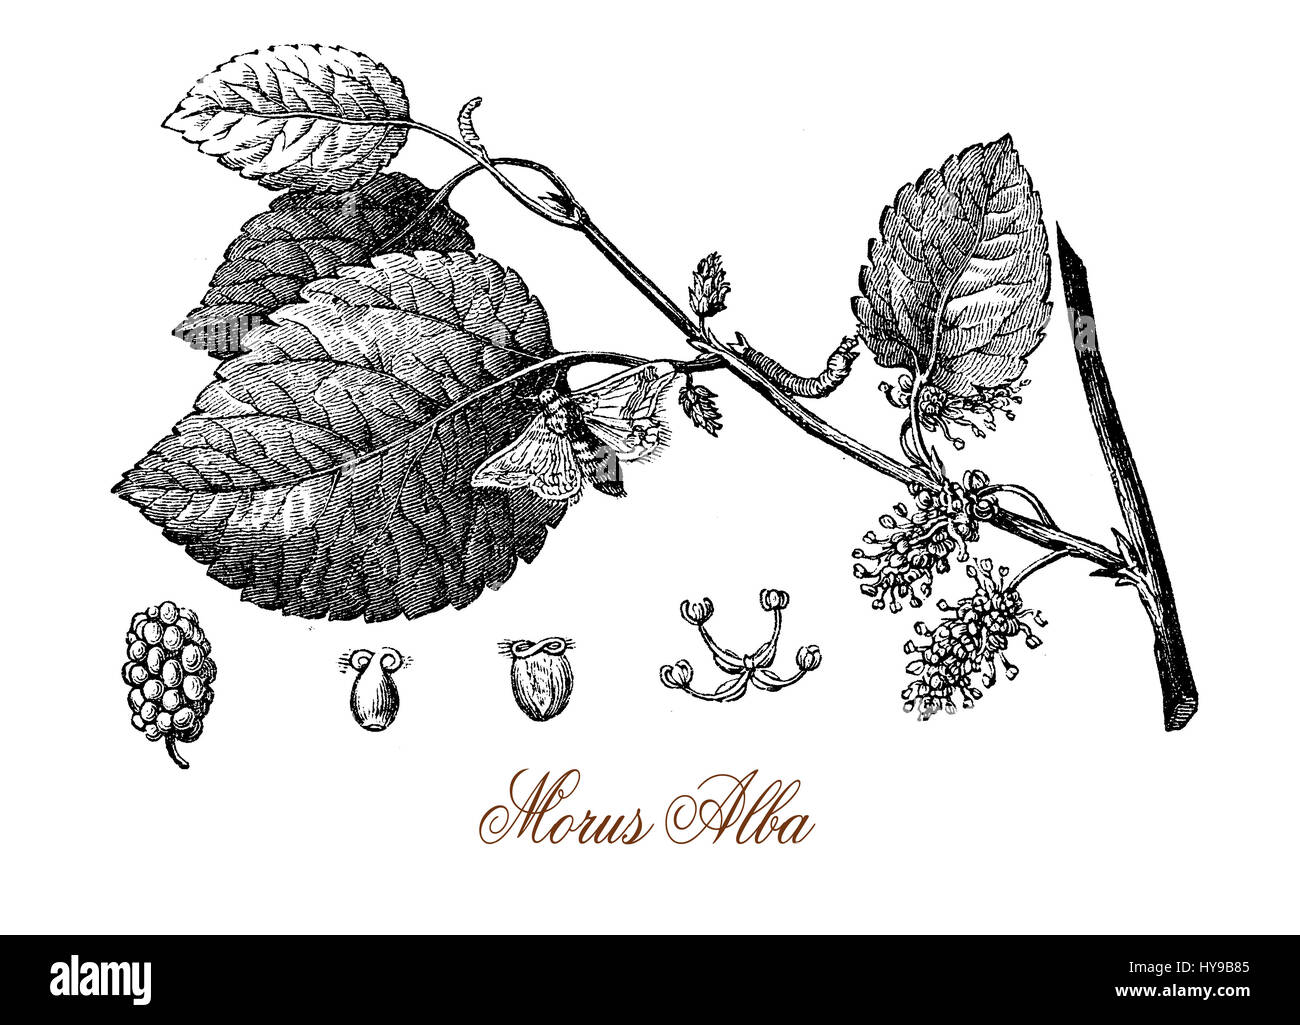 Vintage engraving of white mulberry, tree with  and sweet white fruits cultivated to feed the silkworms for commercial production of silk. Used in traditional medicine and as ornamental tree in landscaping. Stock Photo